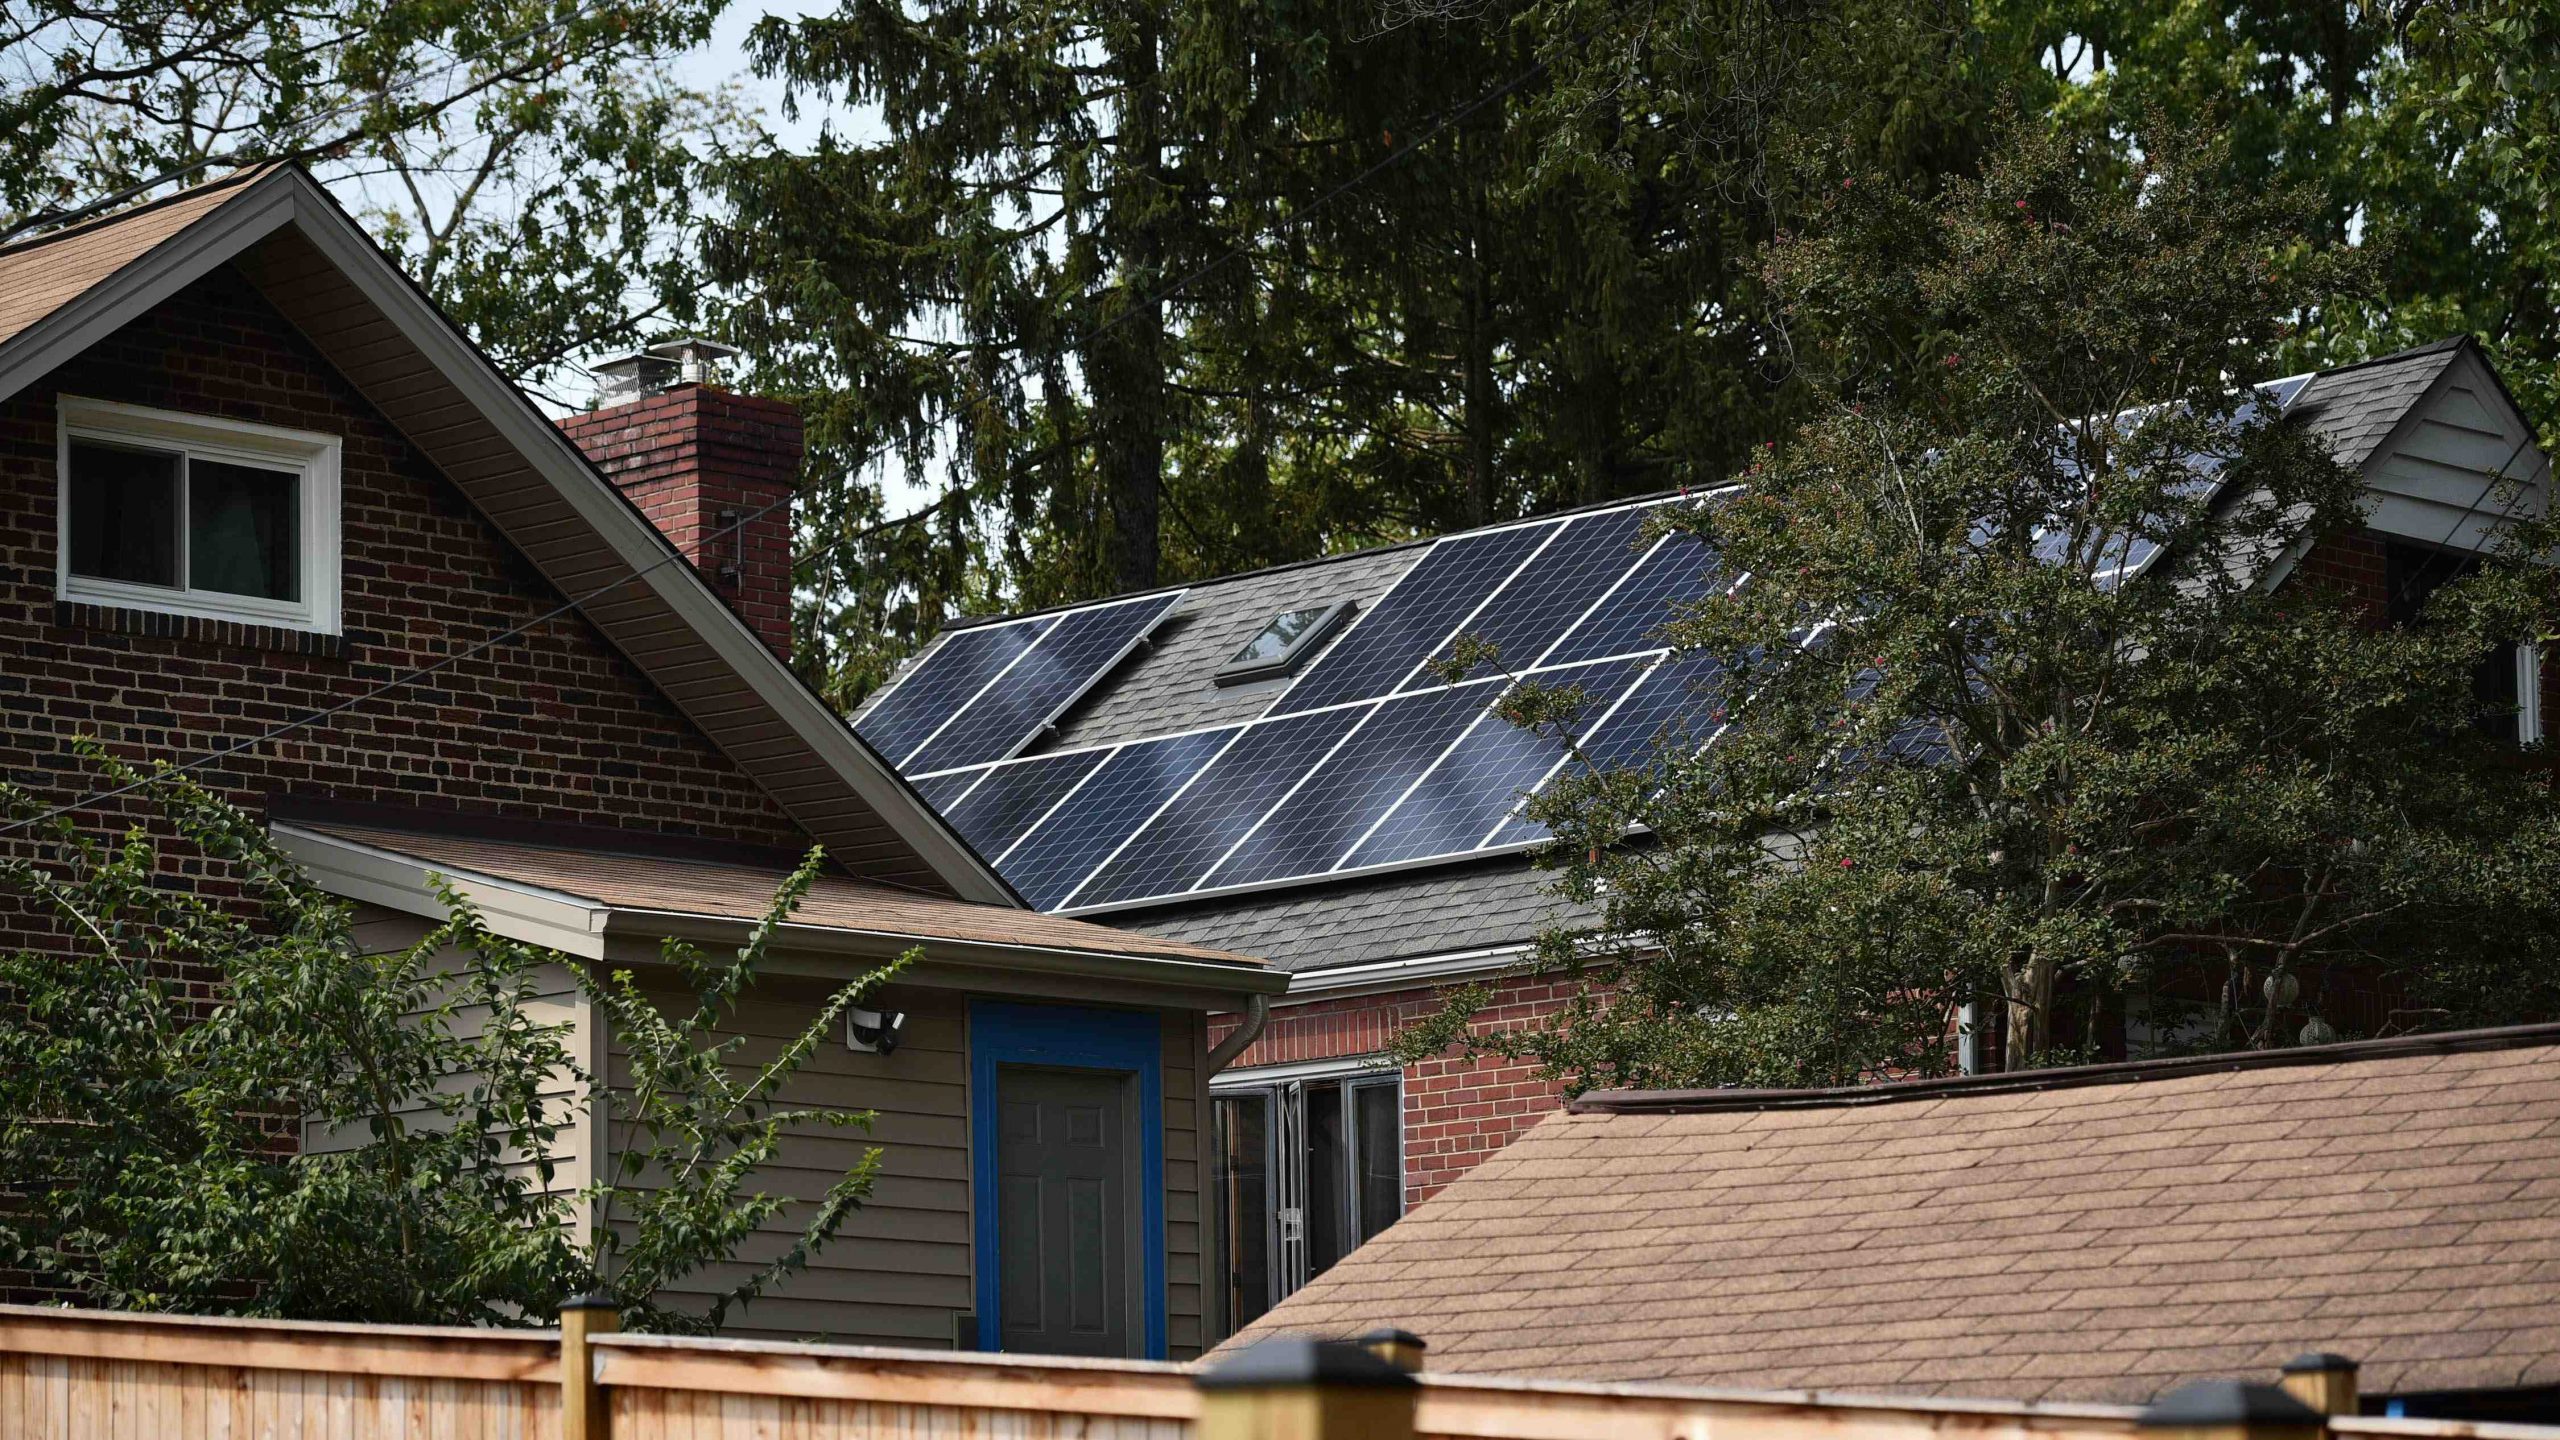 Can every house have solar panels?